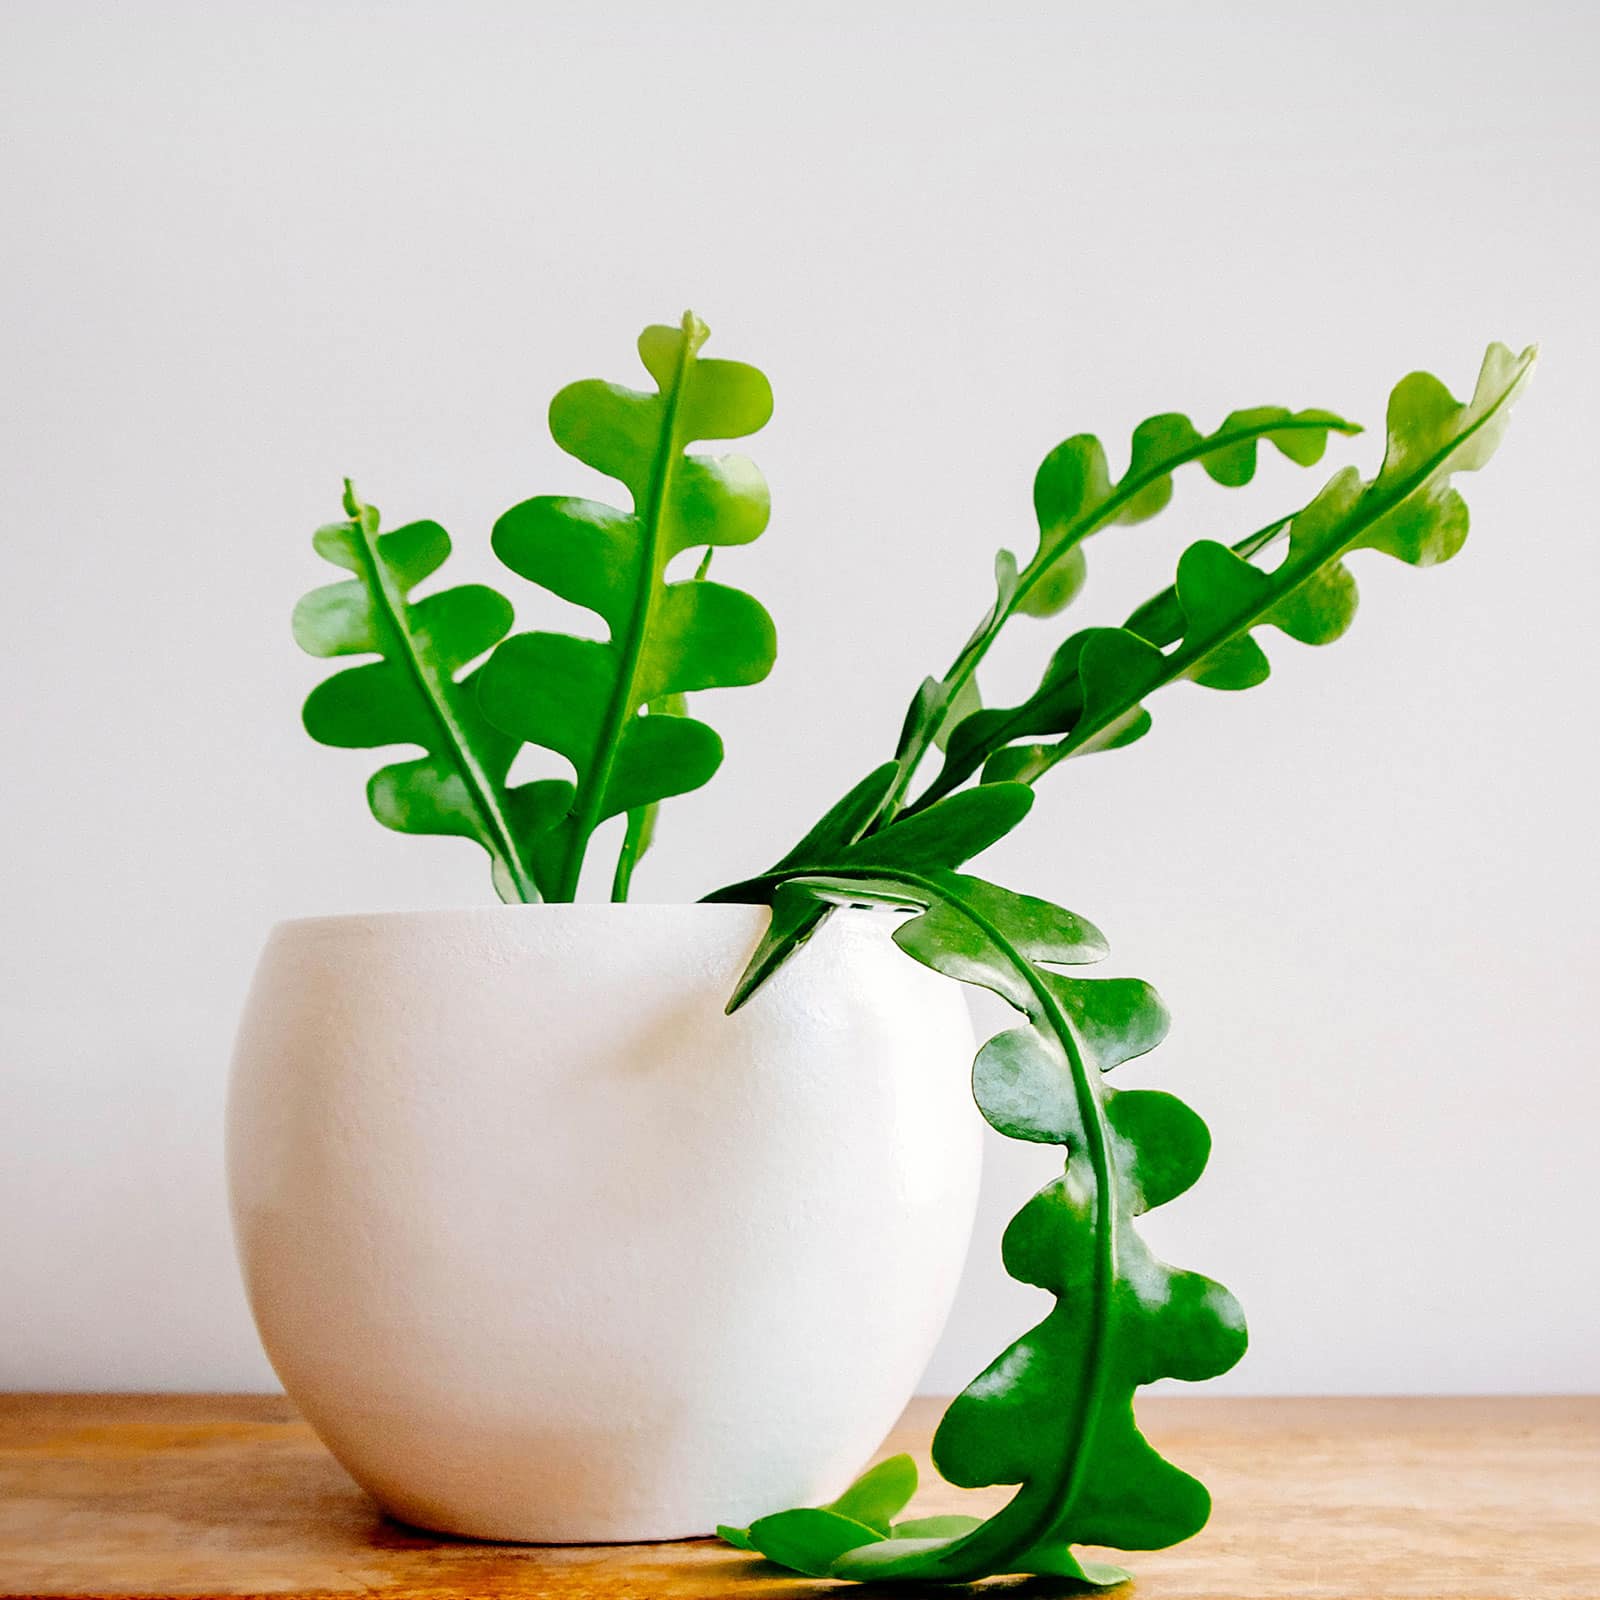 Young fishbone cactus (Disocactus anguliger) in a white ceramic pot on a wooden surface